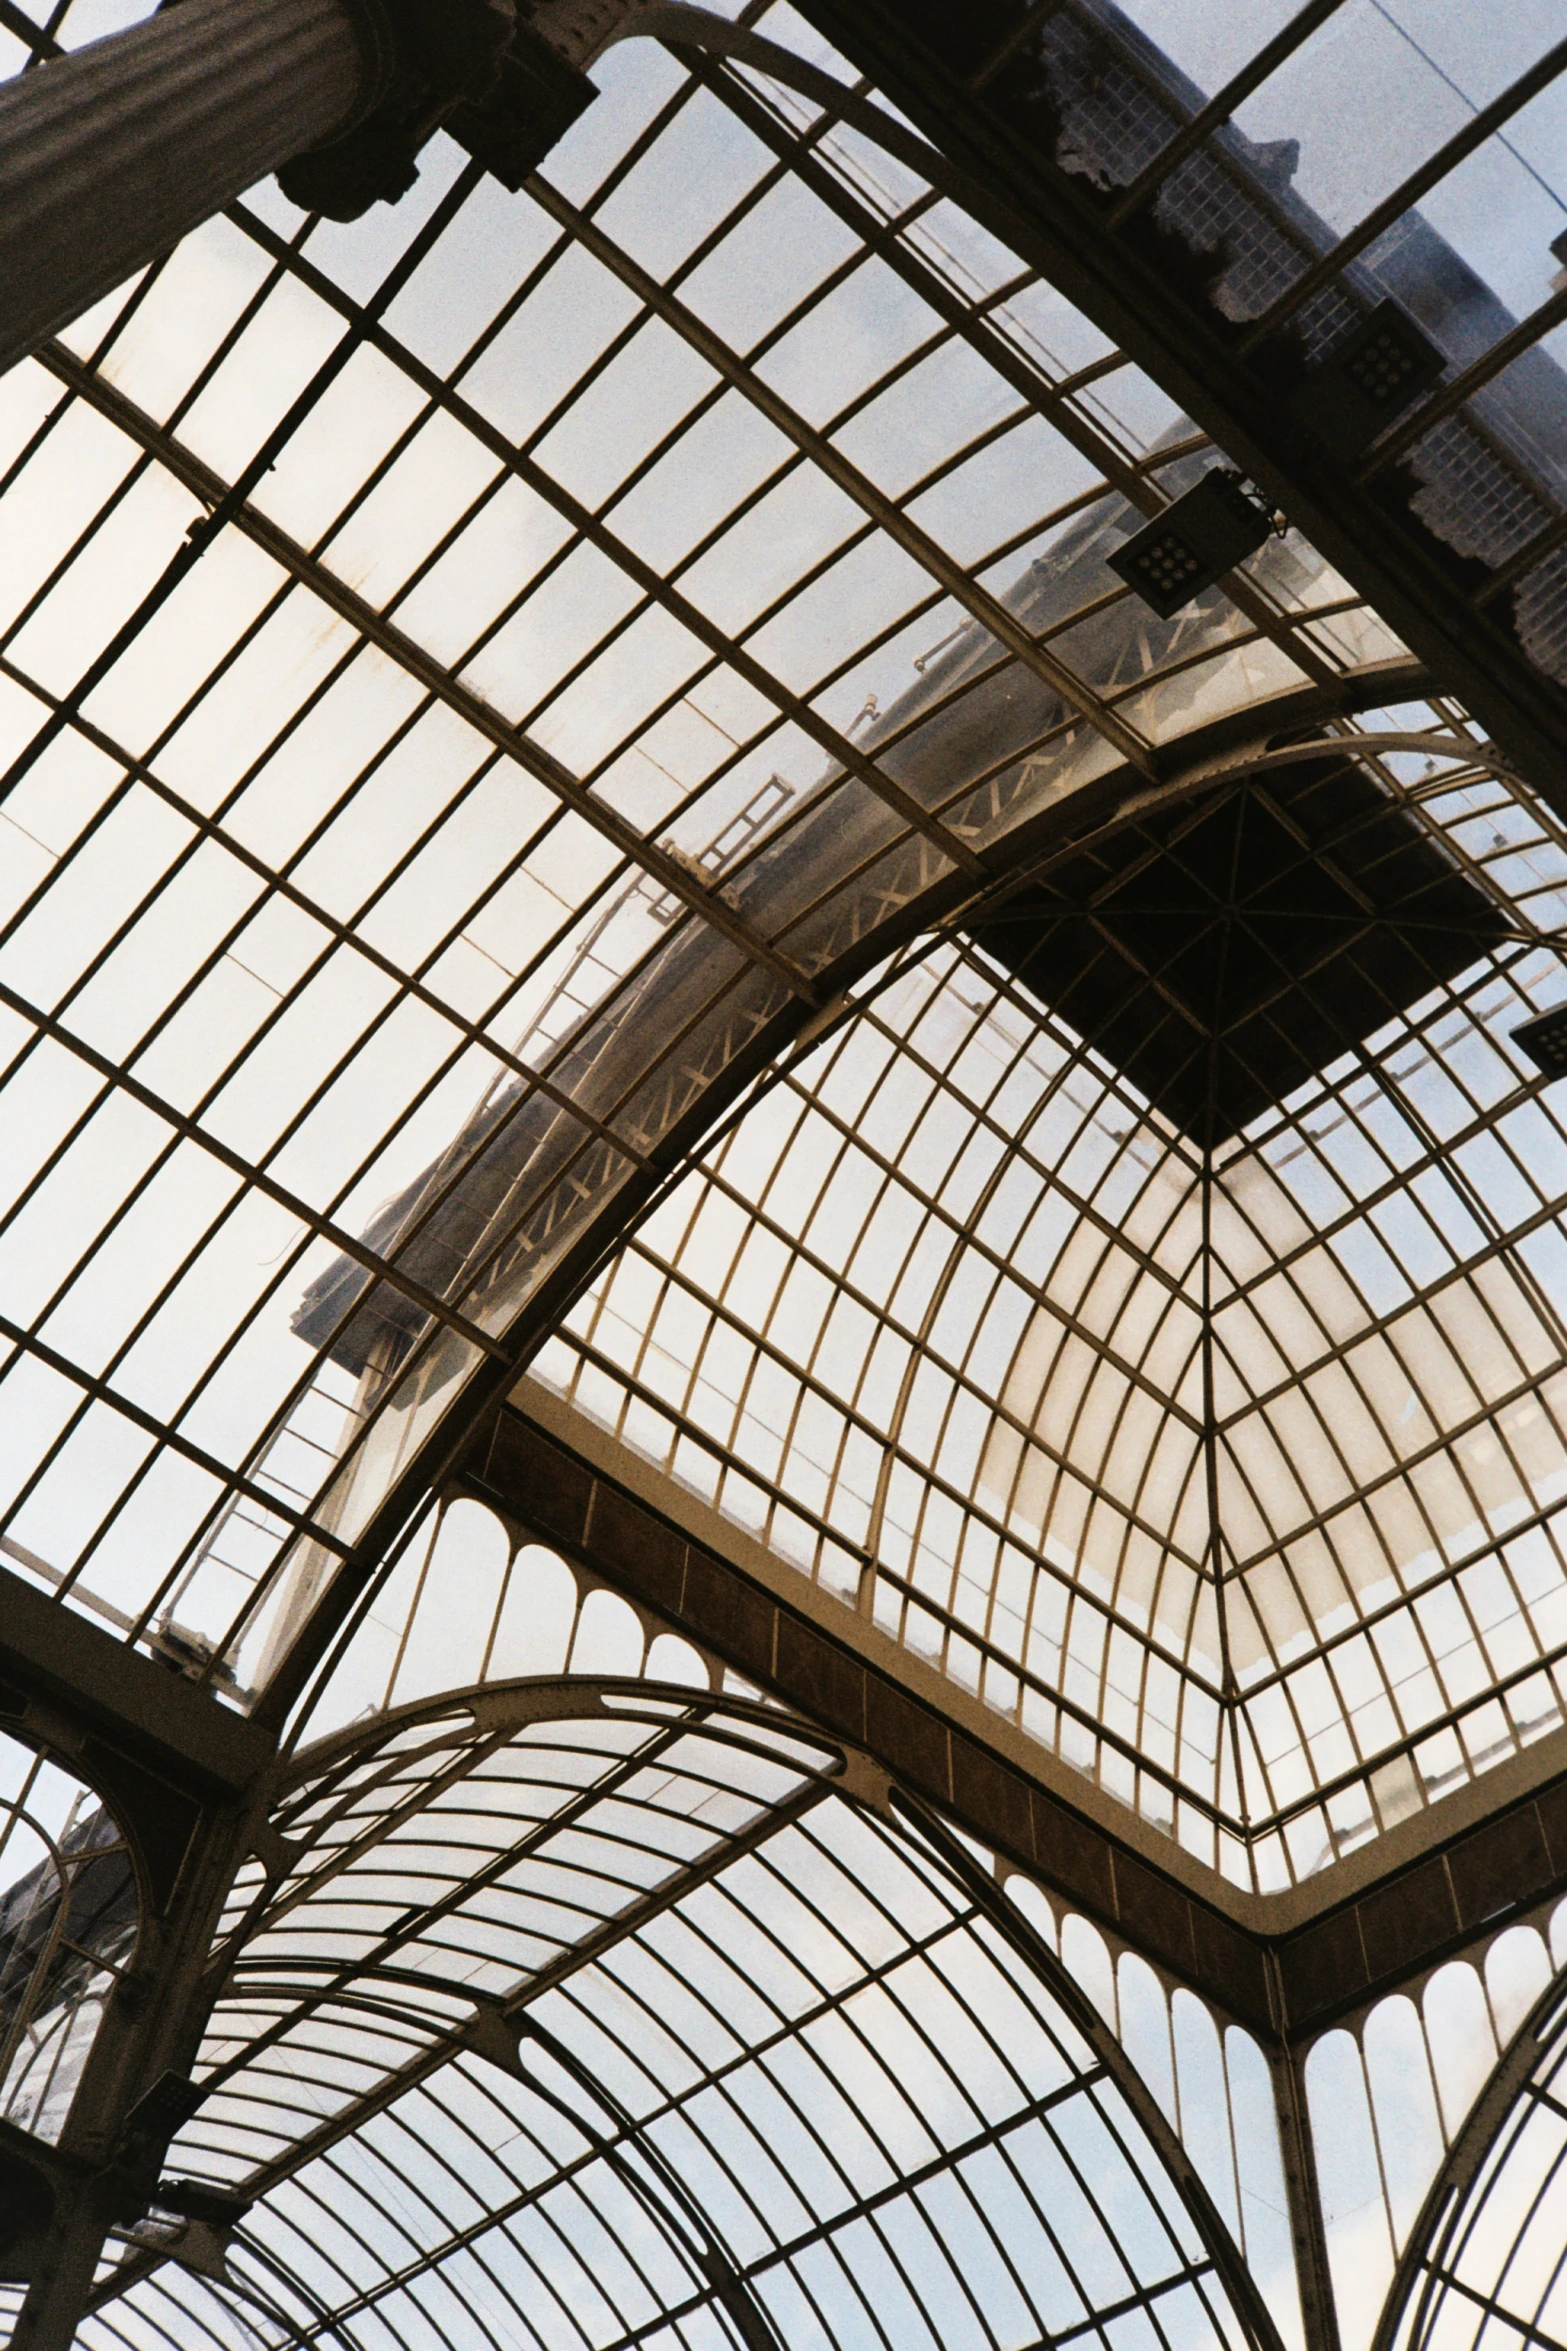 an architectural glass roof over a railway station